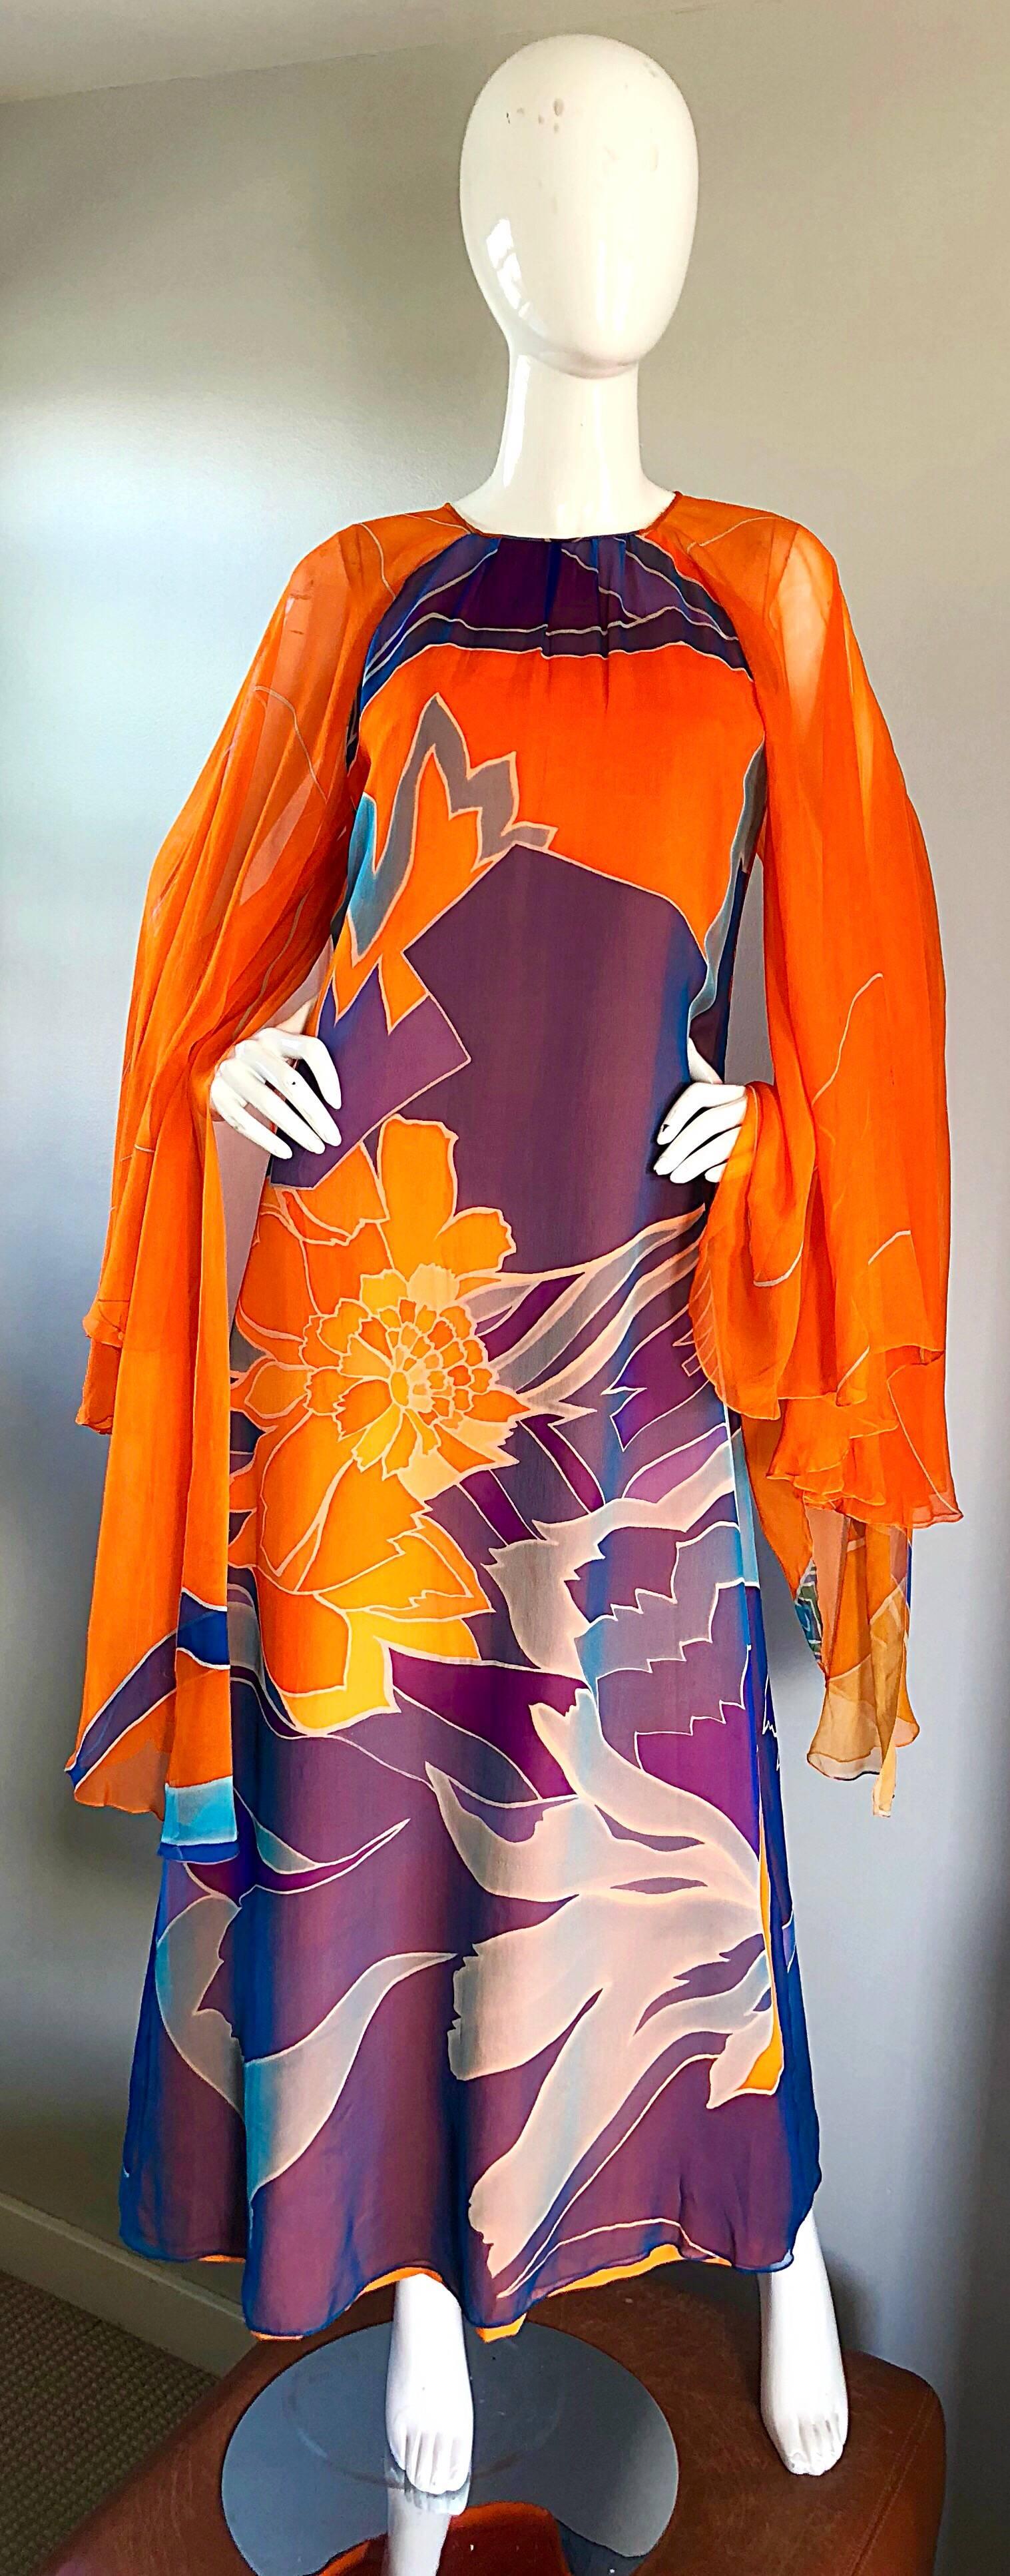 Sensational vintage 70s HANAE MORI COUTURE bright orange silk chiffon kaftan maxi dress! Features incredible dramatic wide angel wing sleeves, with layers and layers of semi sheer chiffon. Vibrant abstract prints in bright orange, purple, blue,